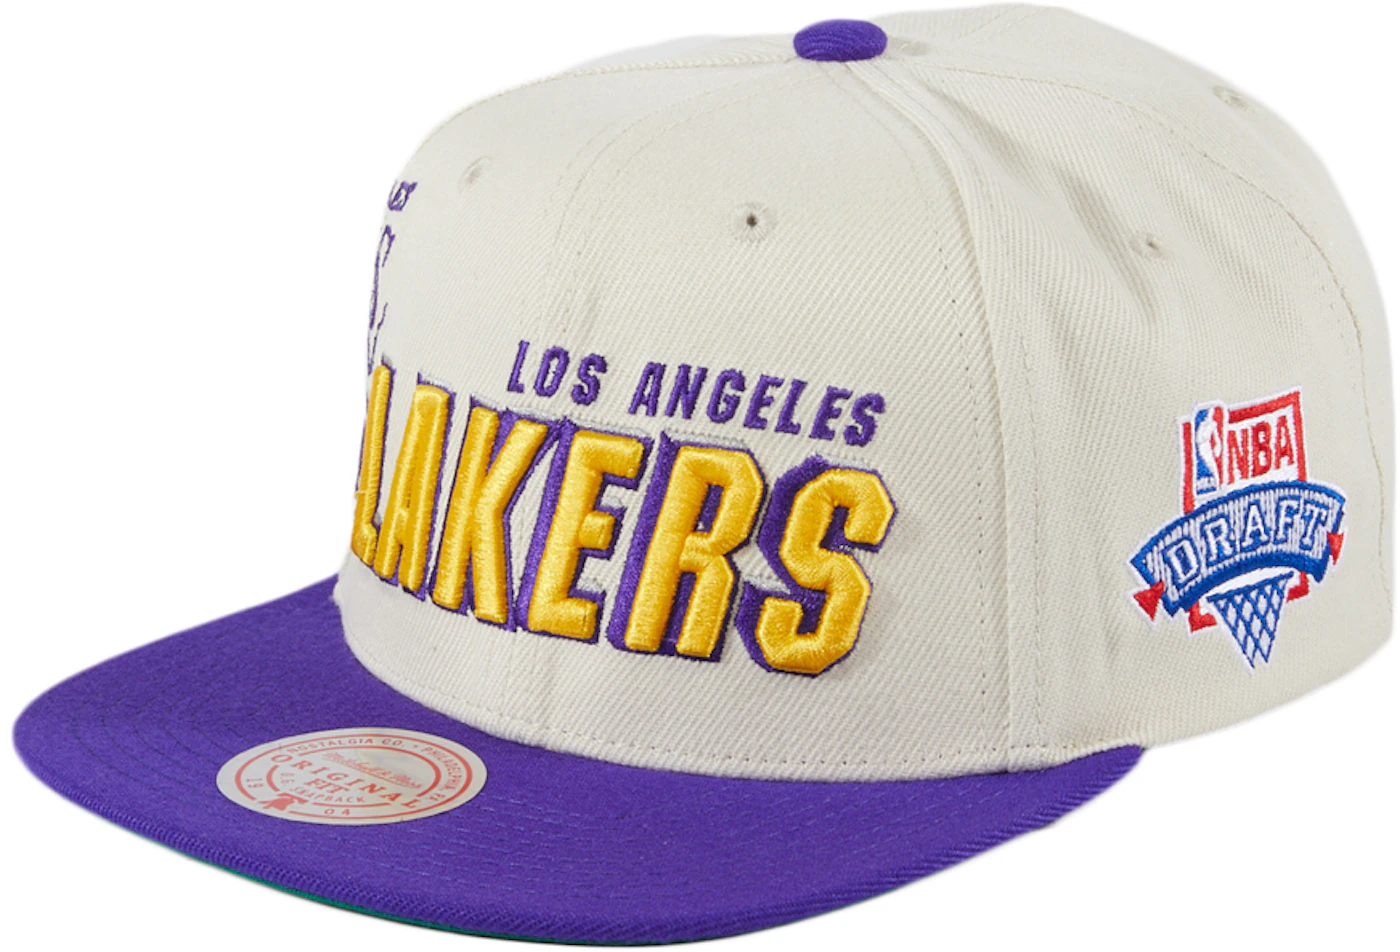 Mitchell & Ness Los Angeles Lakers Beanie (purple)